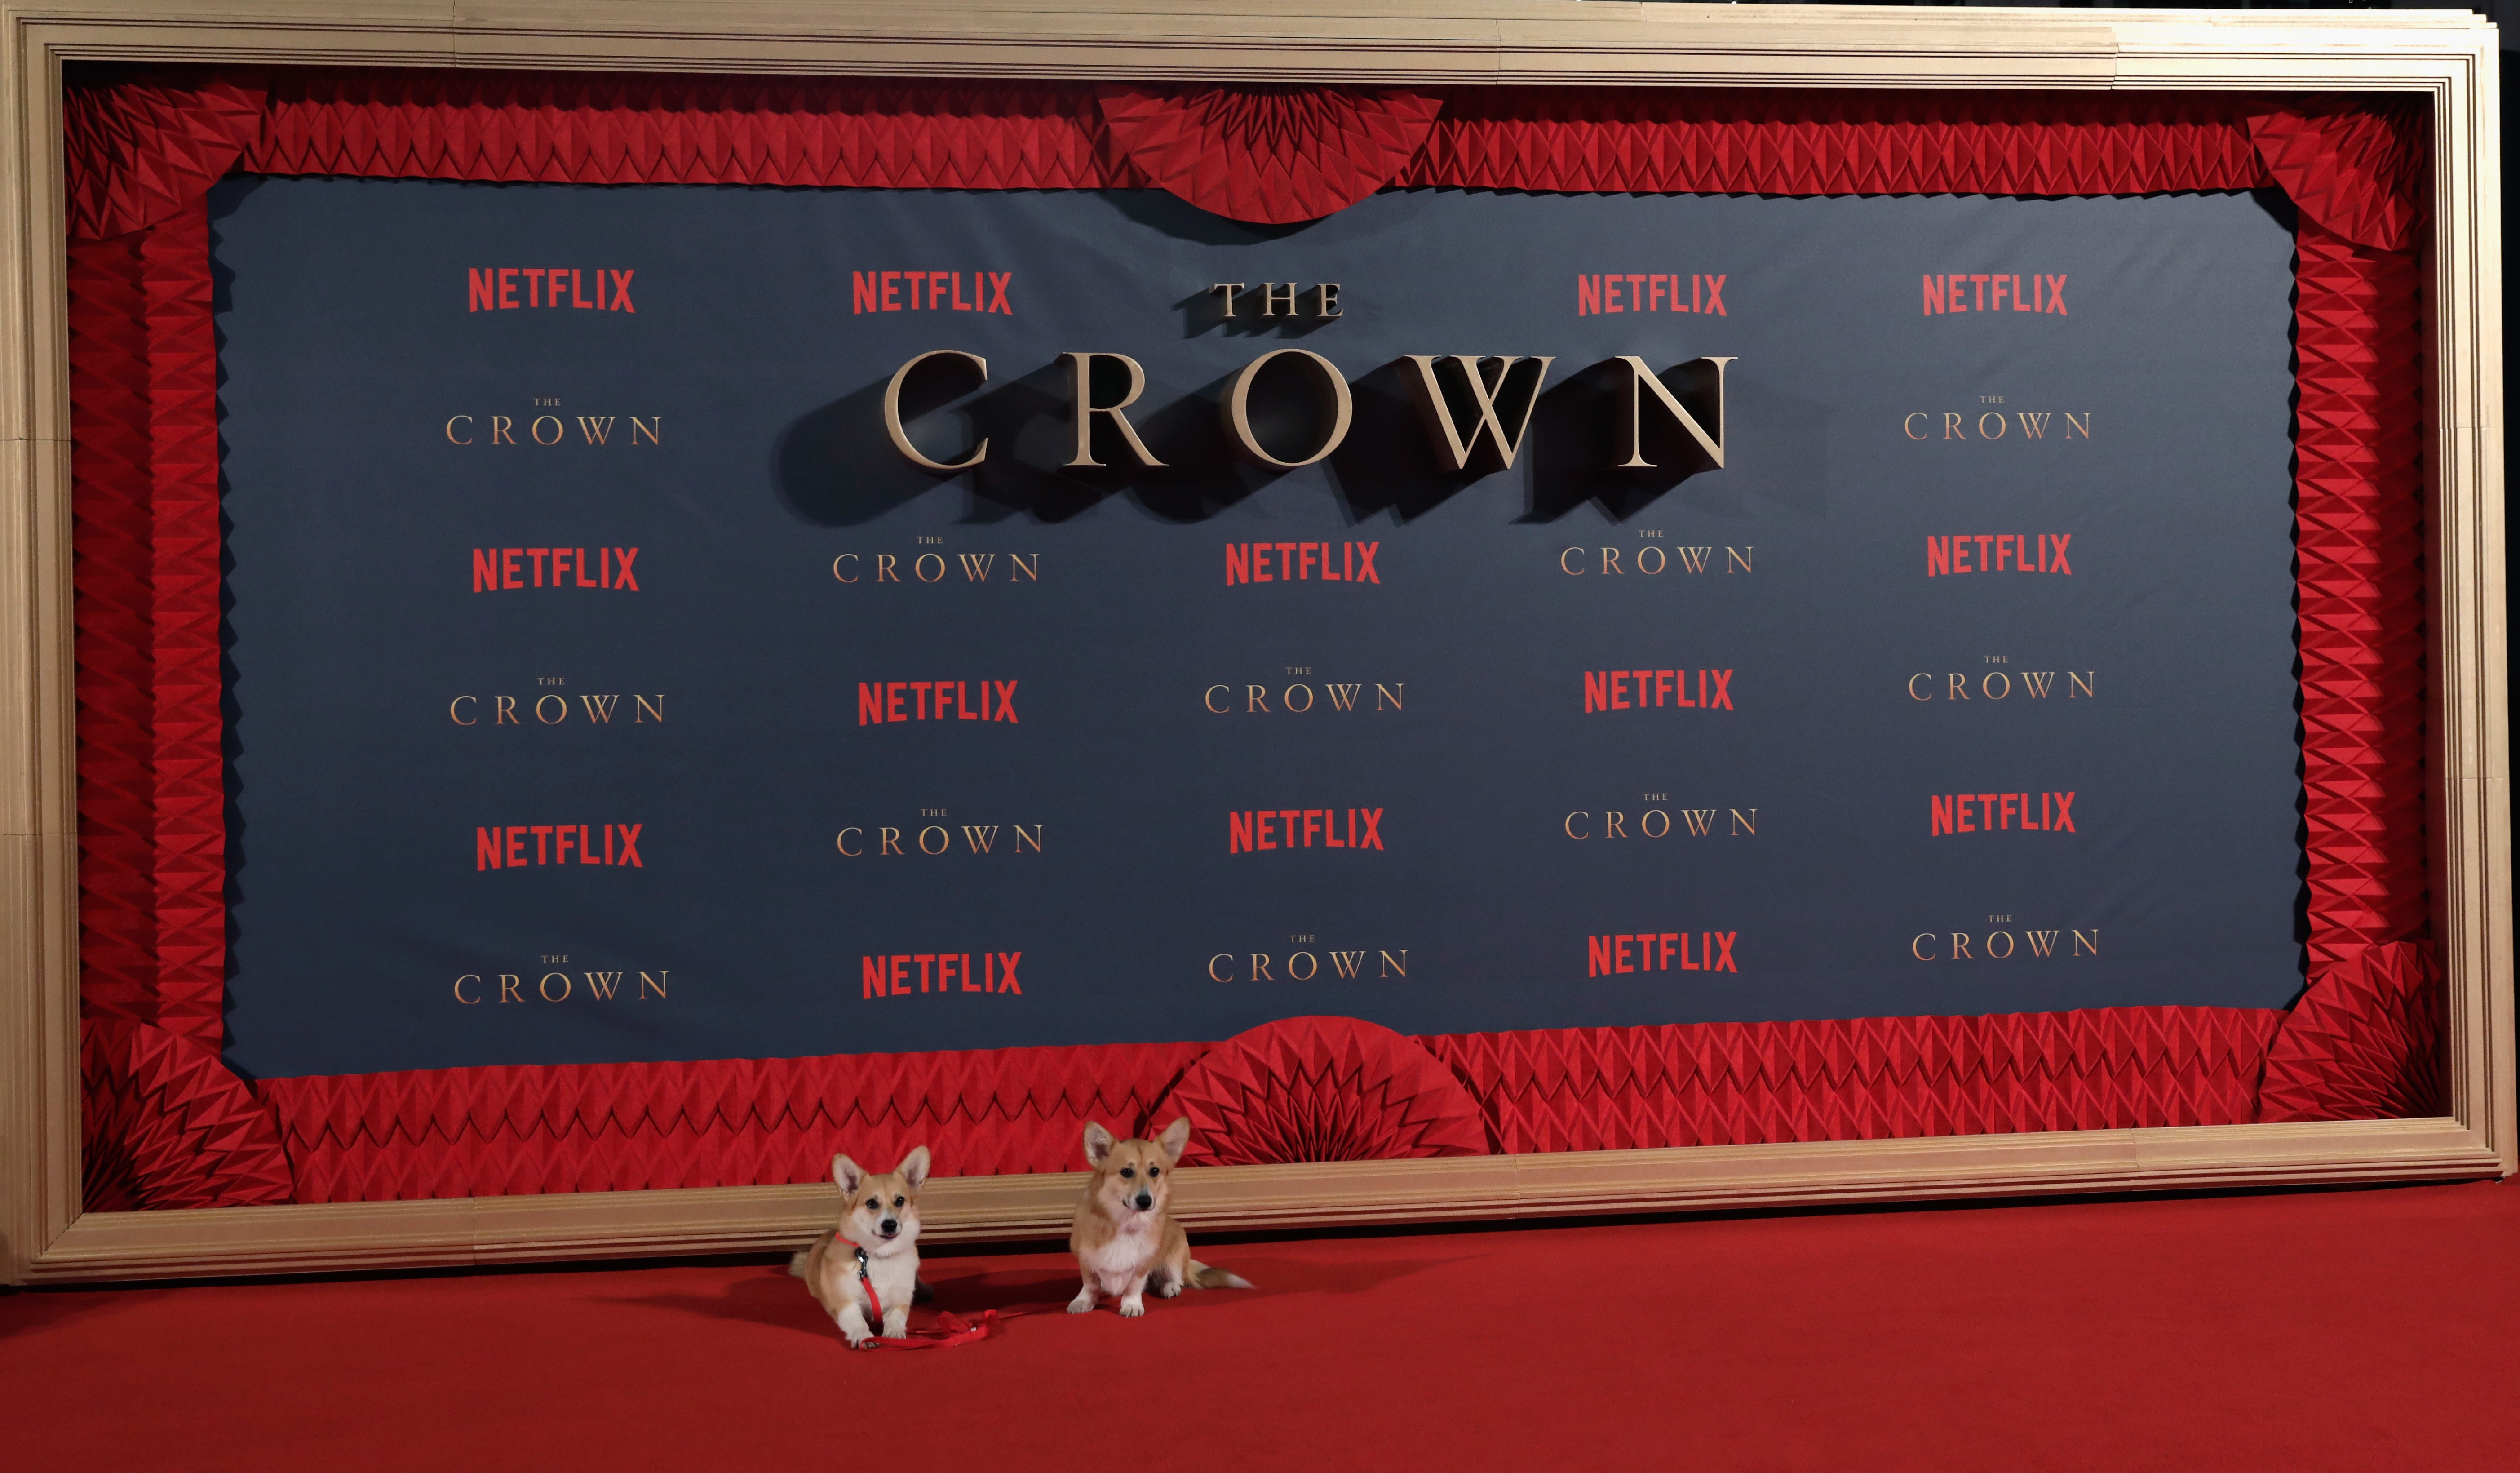 LONDON, ENGLAND - NOVEMBER 21: Royal Corgis at the World Premiere of season 2 of Netflix "The Crown" at Odeon Leicester Square on November 21, 2017 in London, England. (Photo by John Phillips/Getty Images)